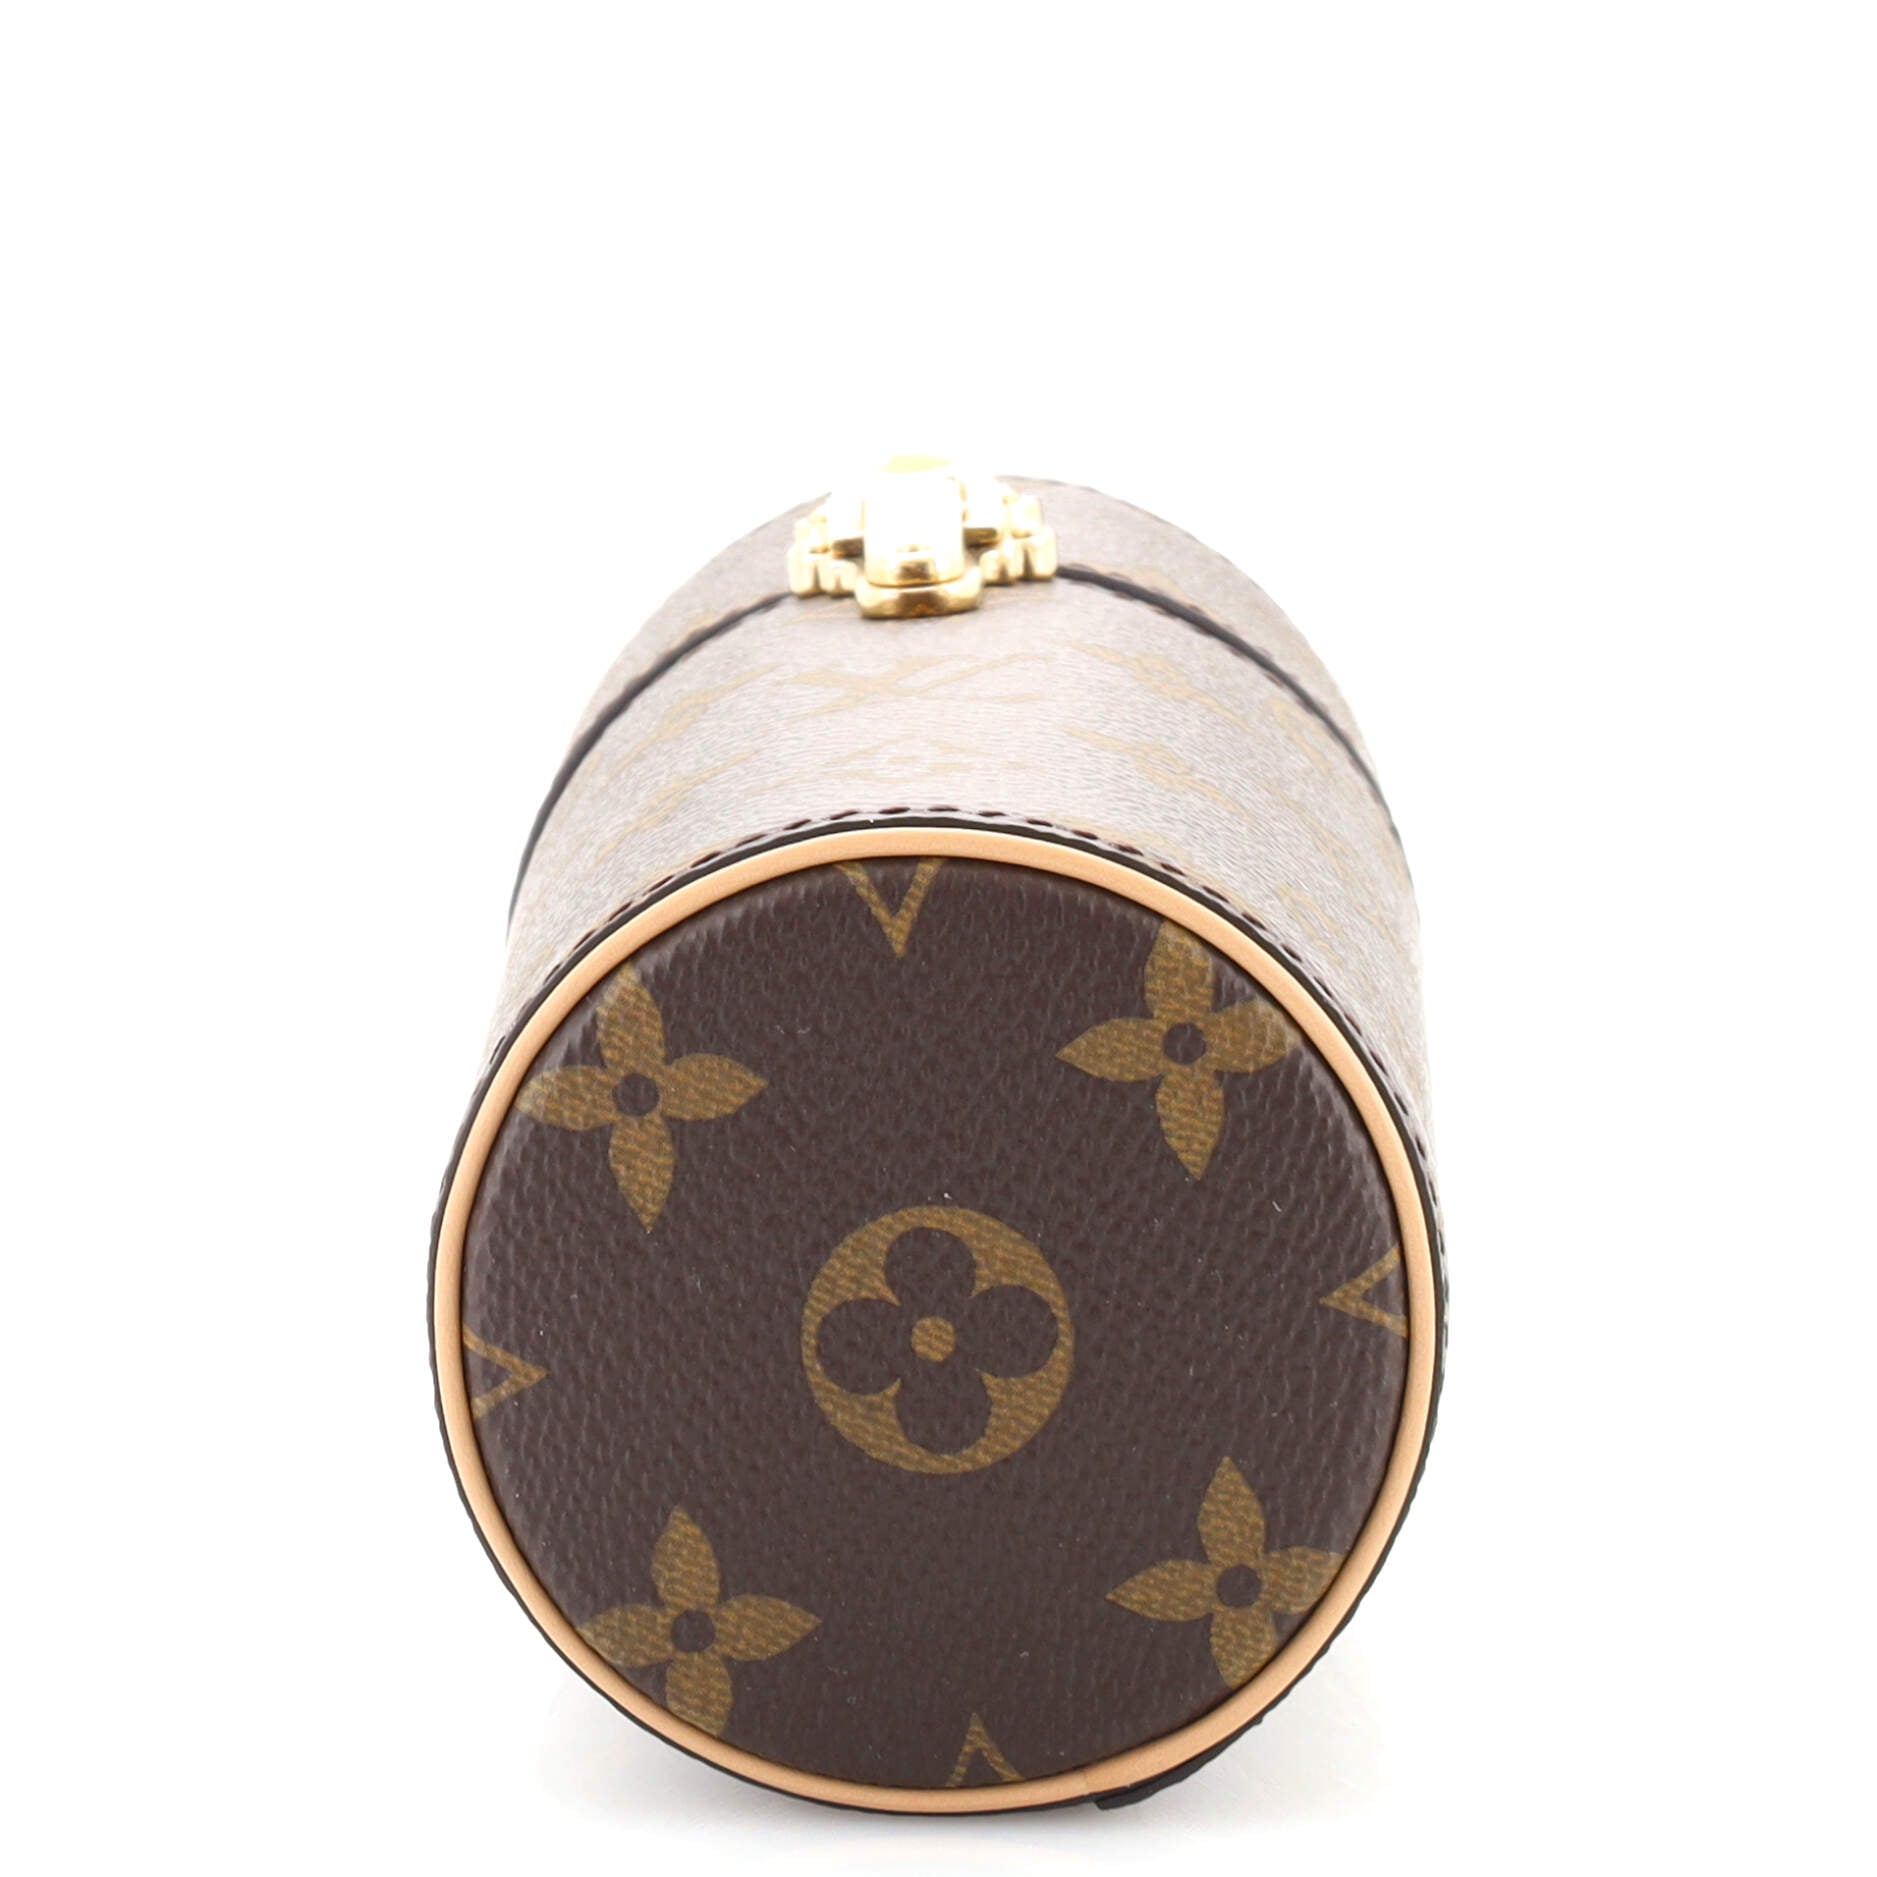 Louis Vuitton PERFUME CASE 200ml, BOX, WRAPPING PAPER & RIBBONS - No  Product!!